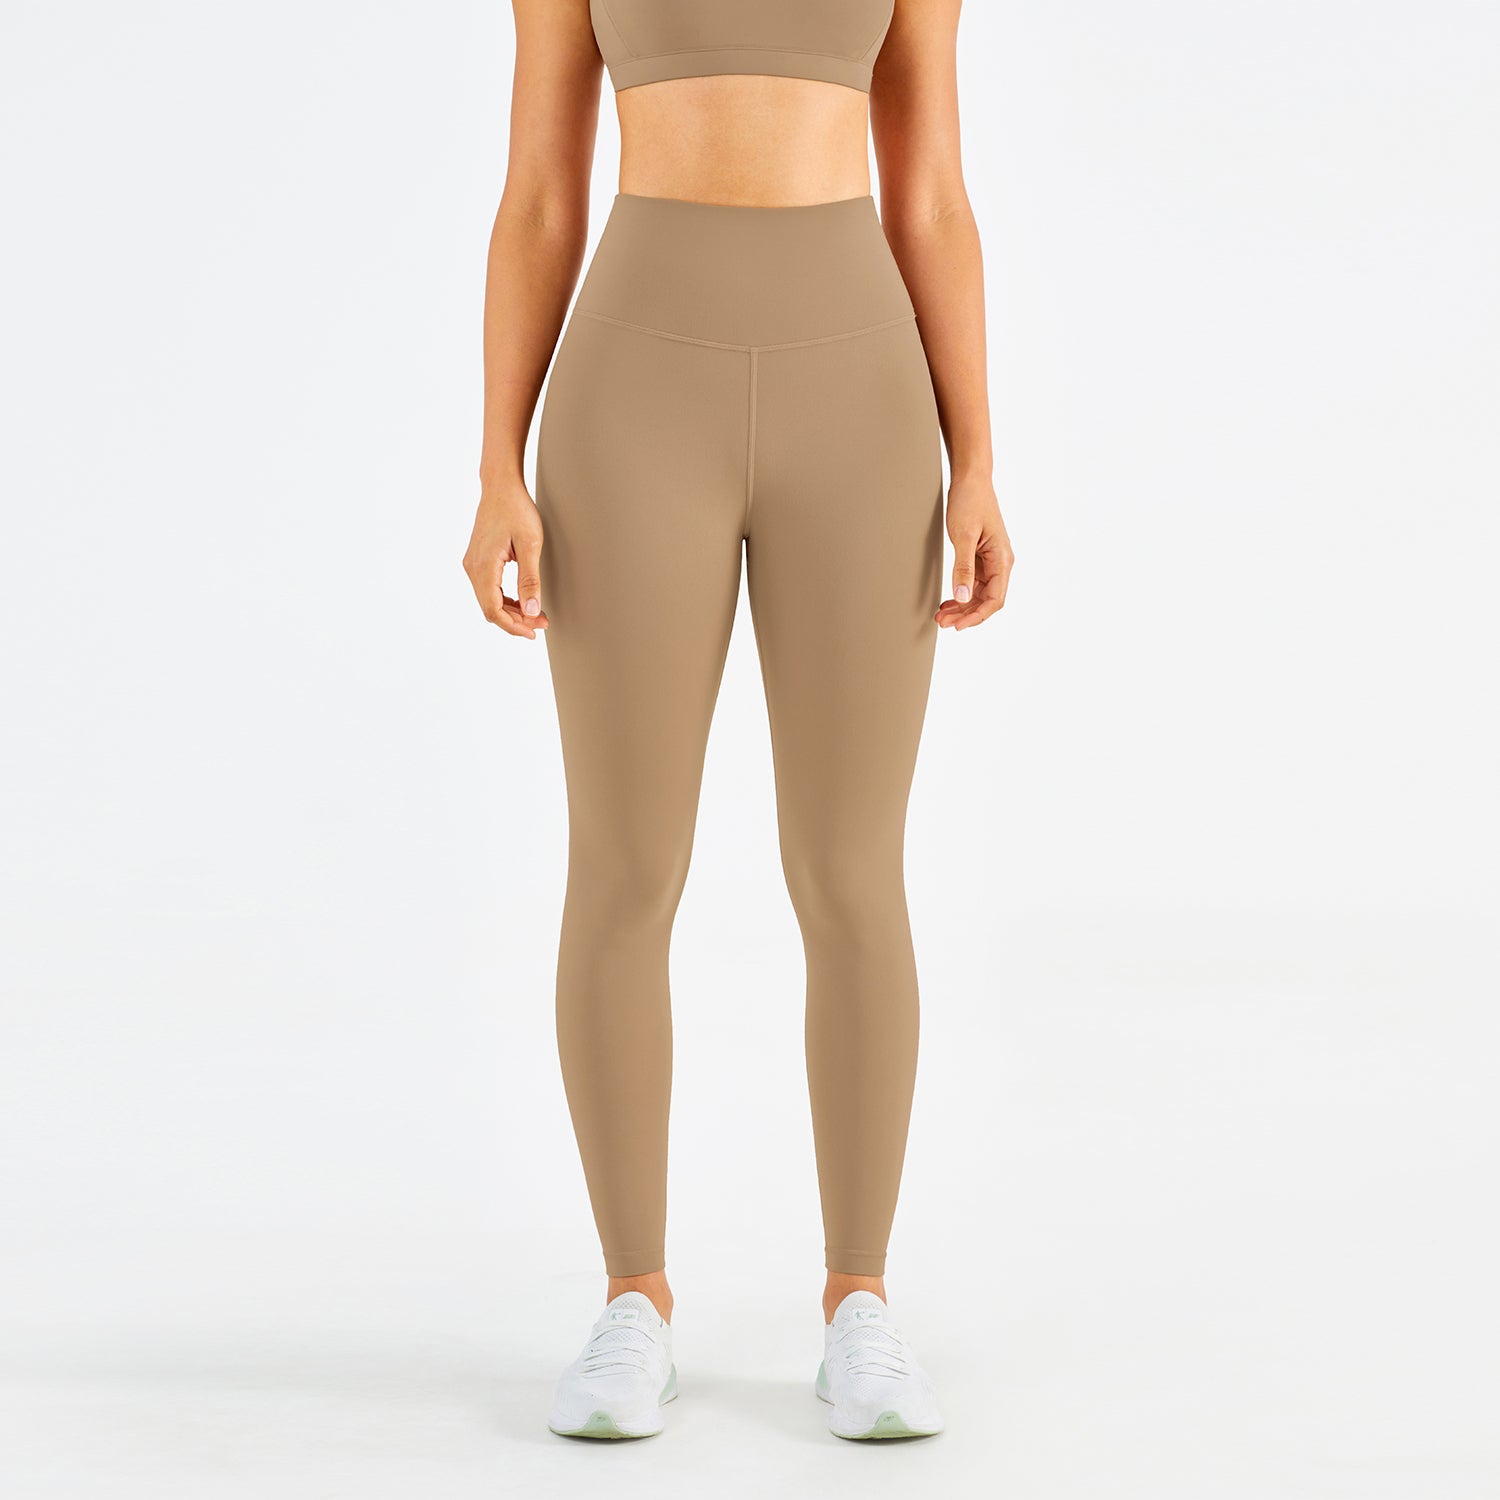  High Waisted Yoga Workout Tights Pants Super Soft